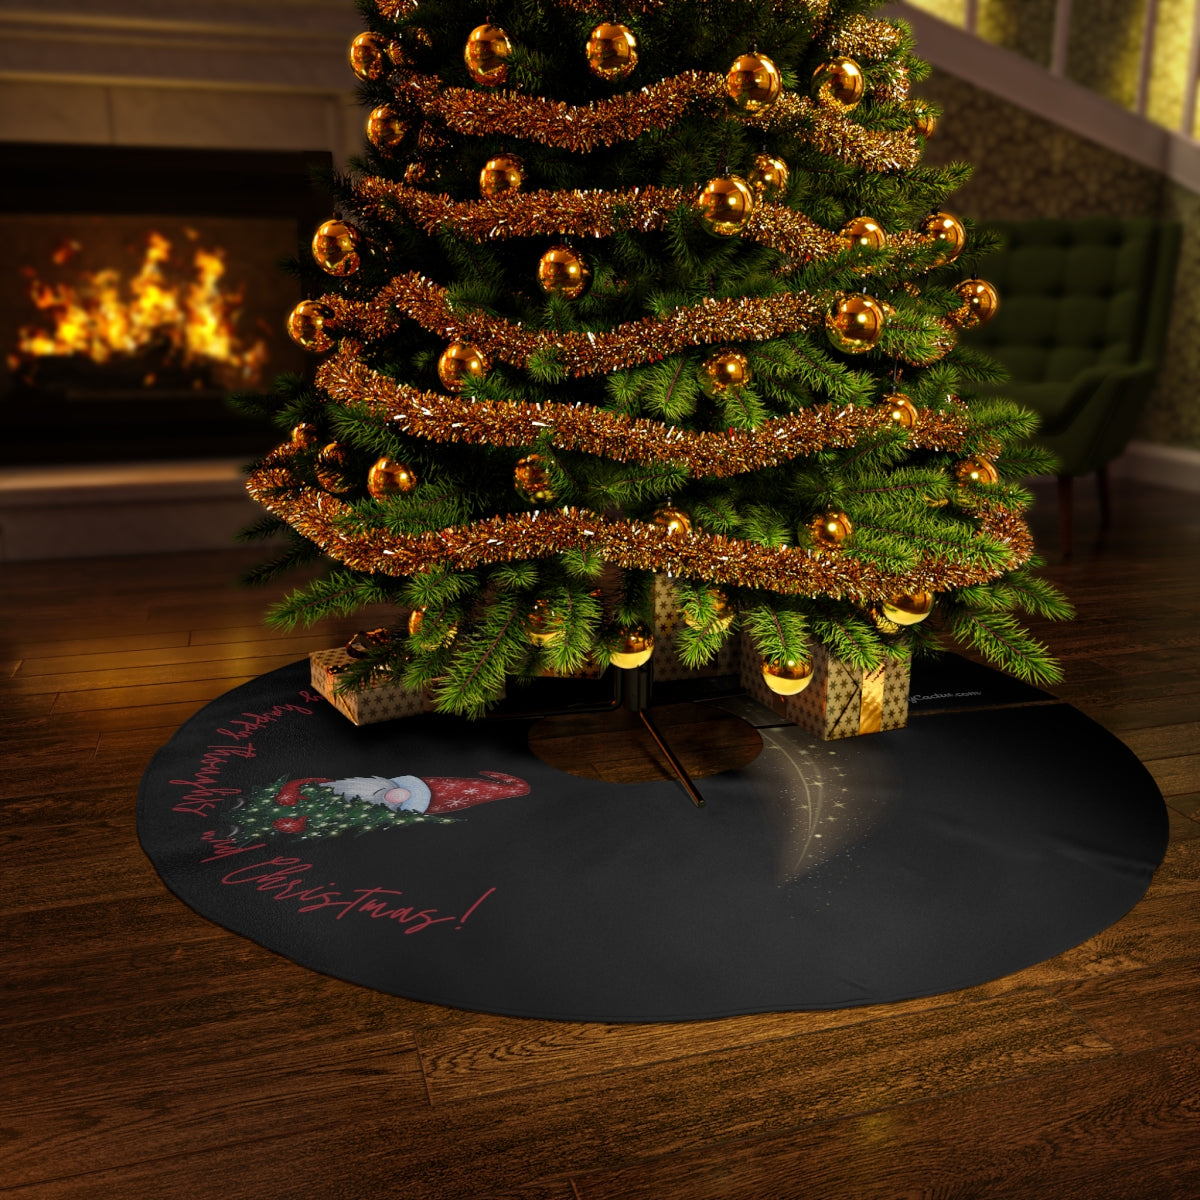 Black Fueled by Happy Thoughts & Christmas with 3 Christmas Gnome and Starry Night ~ Christmas Holiday Round Tree Skirt